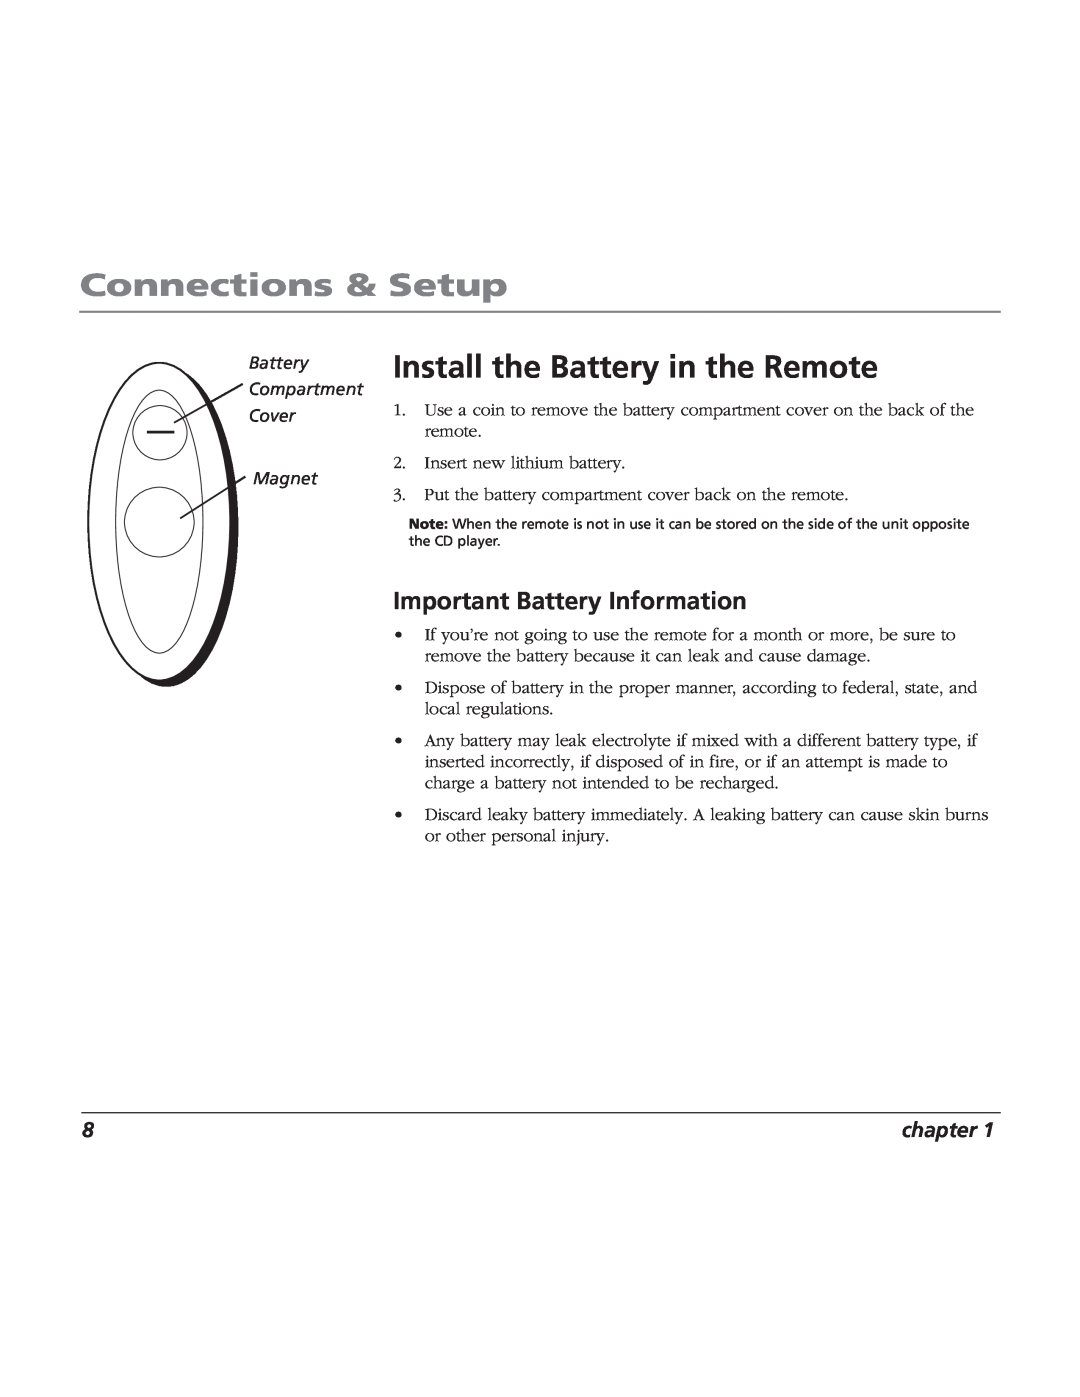 RCA TV/Radio/CD Player Install the Battery in the Remote, Important Battery Information, Compartment, Cover, Magnet 